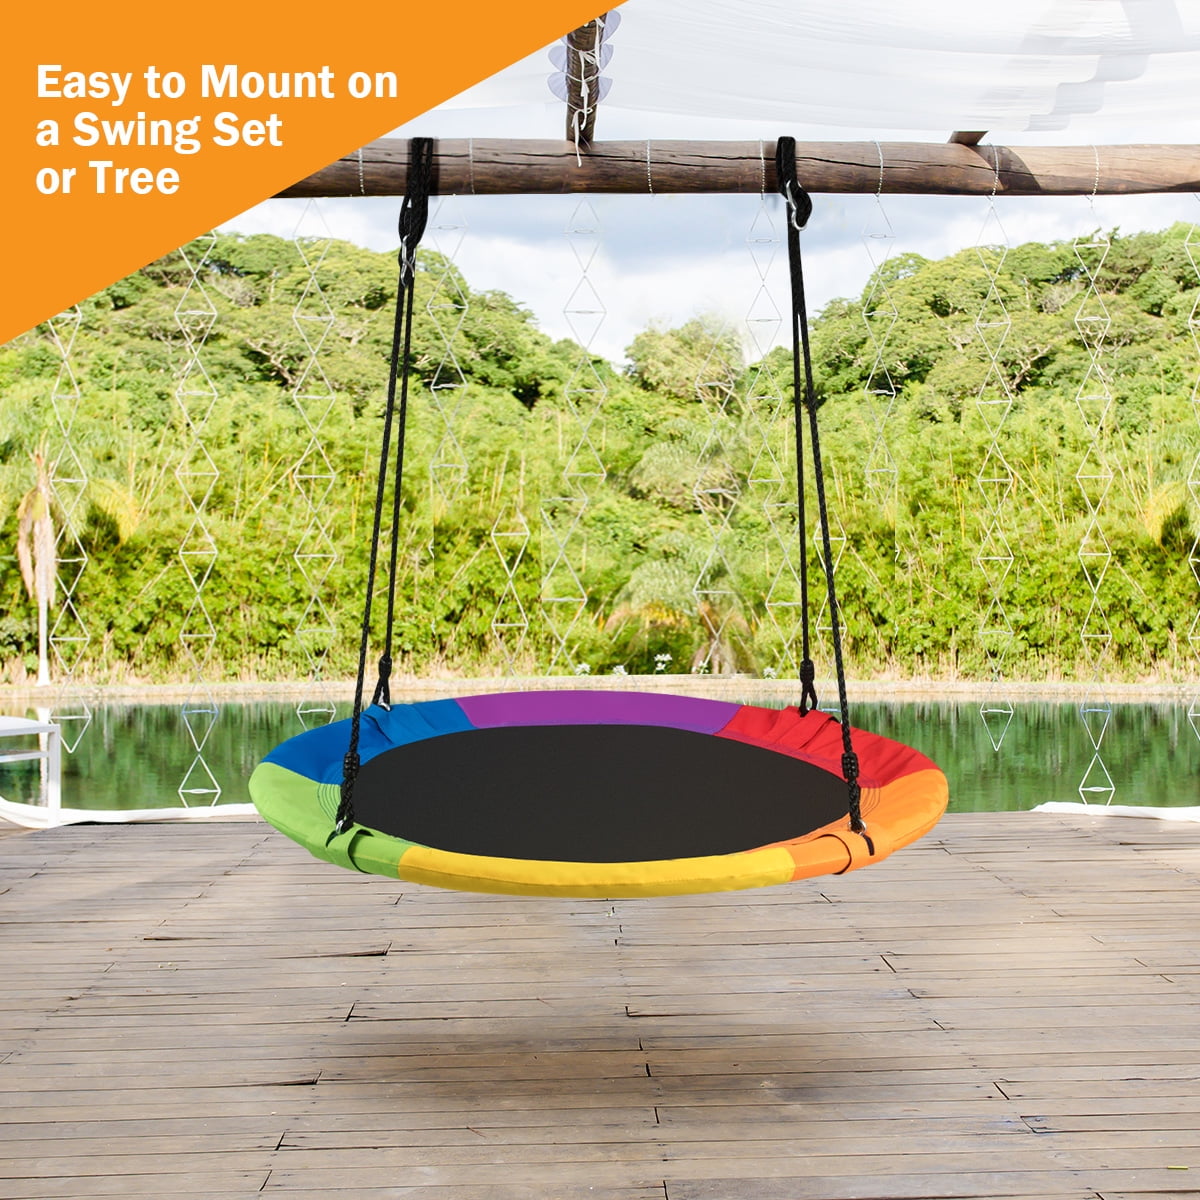 Lovinouse Premium 43 Inch Saucer Tree Swing Set Large Round Swings Attaches to Trees or Existing Swings Sets Adjustable Hanging Ropes 